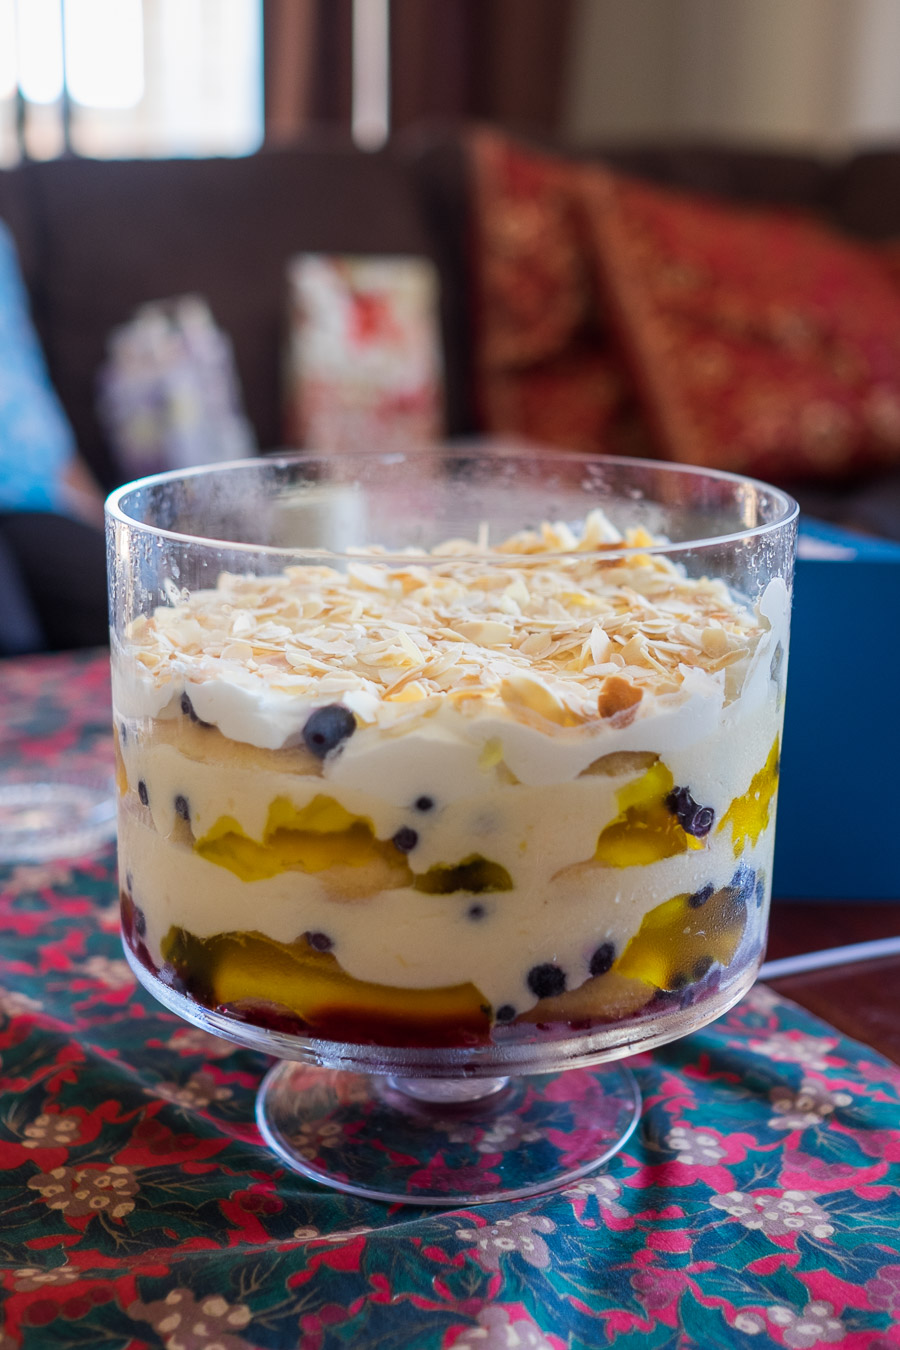 The trifle